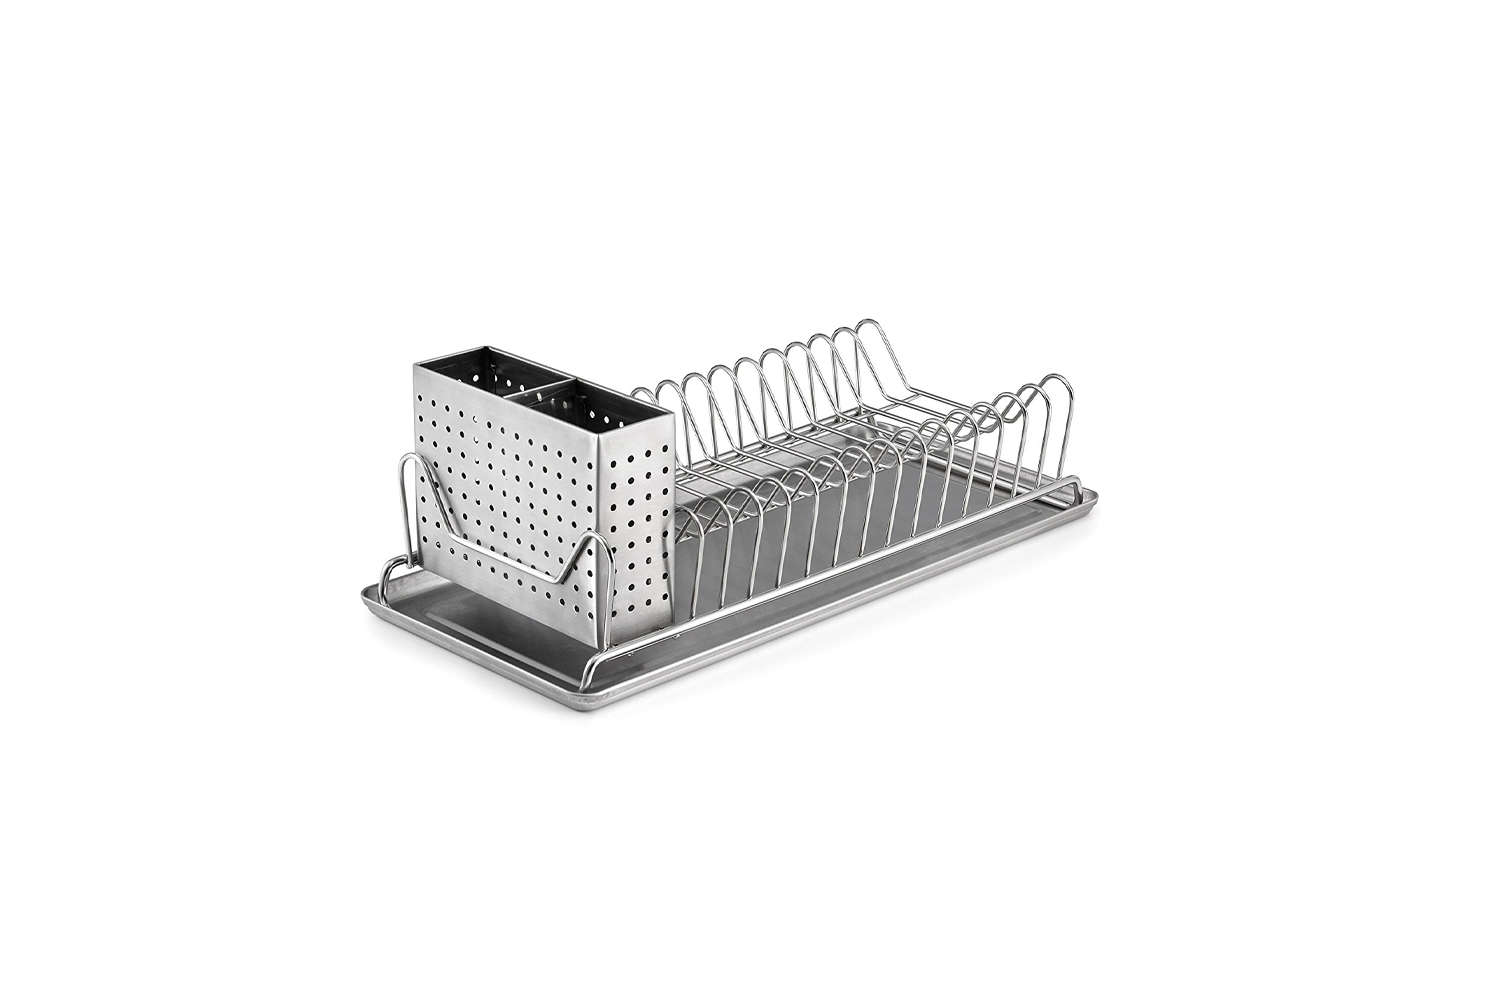 https://www.remodelista.com/ezoimgfmt/www.organized-home.com/wp-content/uploads/2018/06/polder-compact-stainless-steel-dish-rack.jpg?ezimgfmt=rs:392x261/rscb4